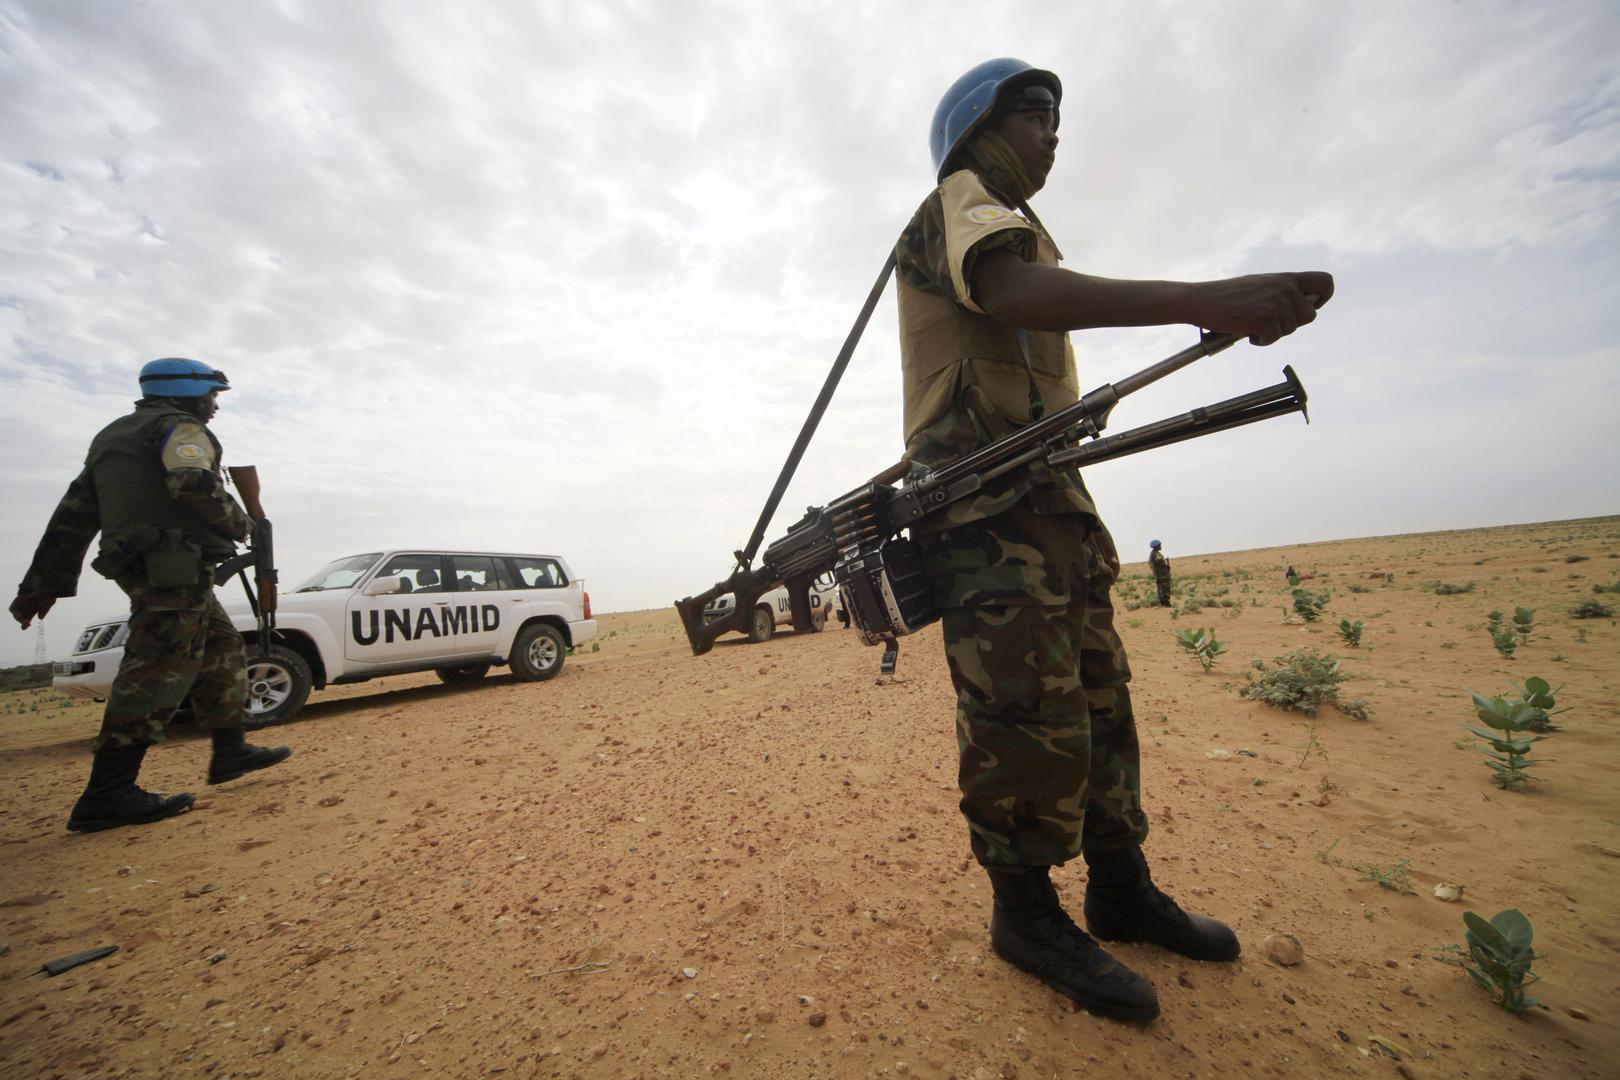 United Nations Mission in Darfur peacekeepers stand guard in Shagra village, North Darfur, October 18, 2012.